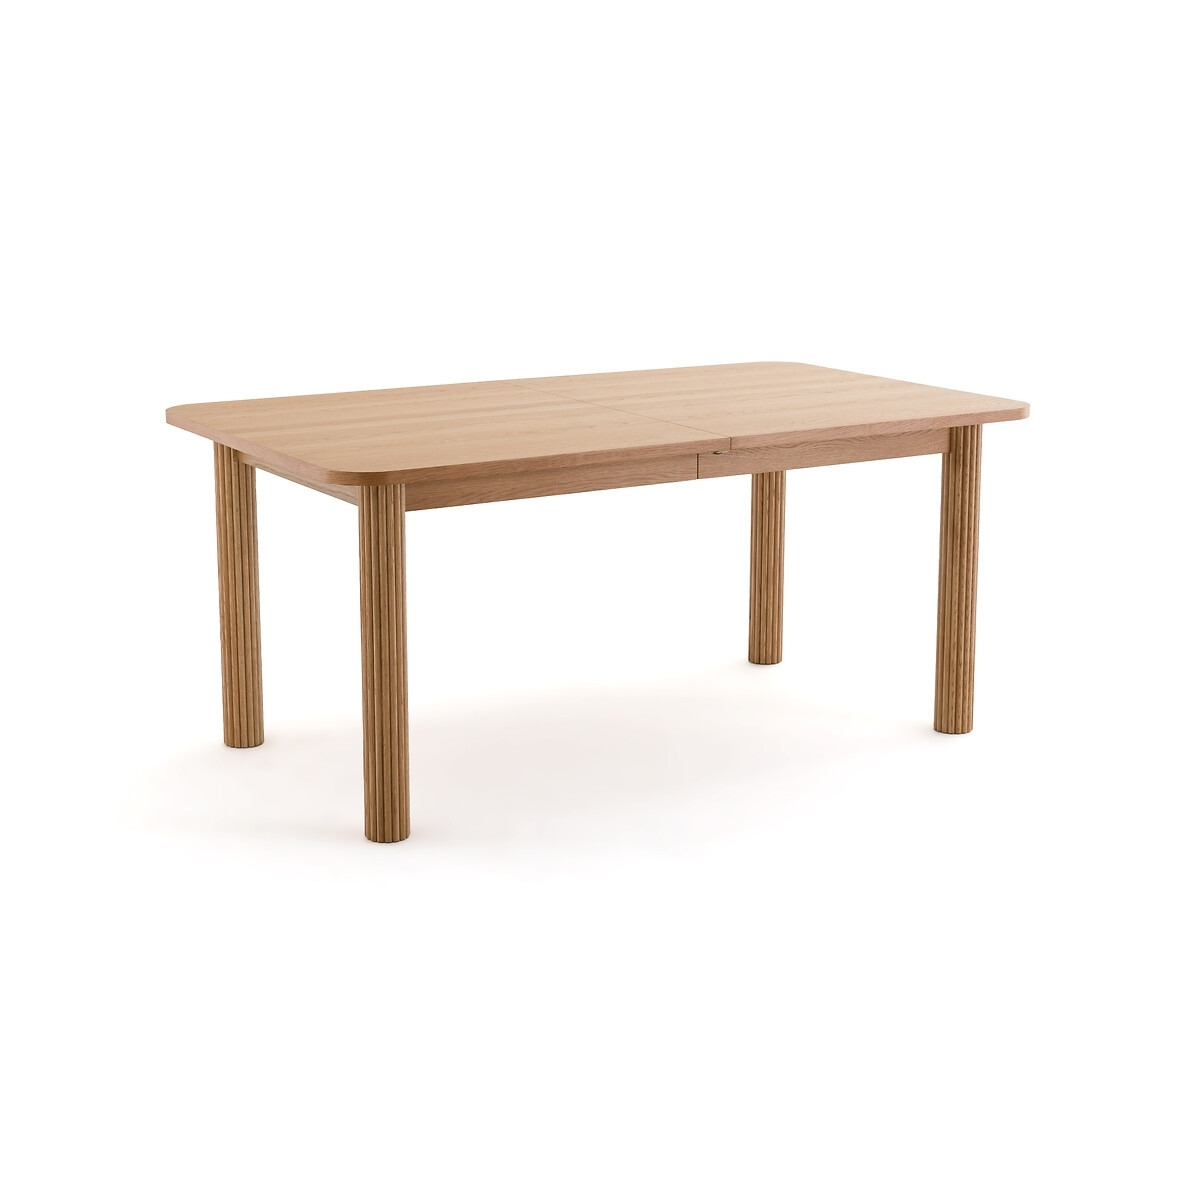 Desna Extendable Oak Dining Table (Seats 6-10) - image 1